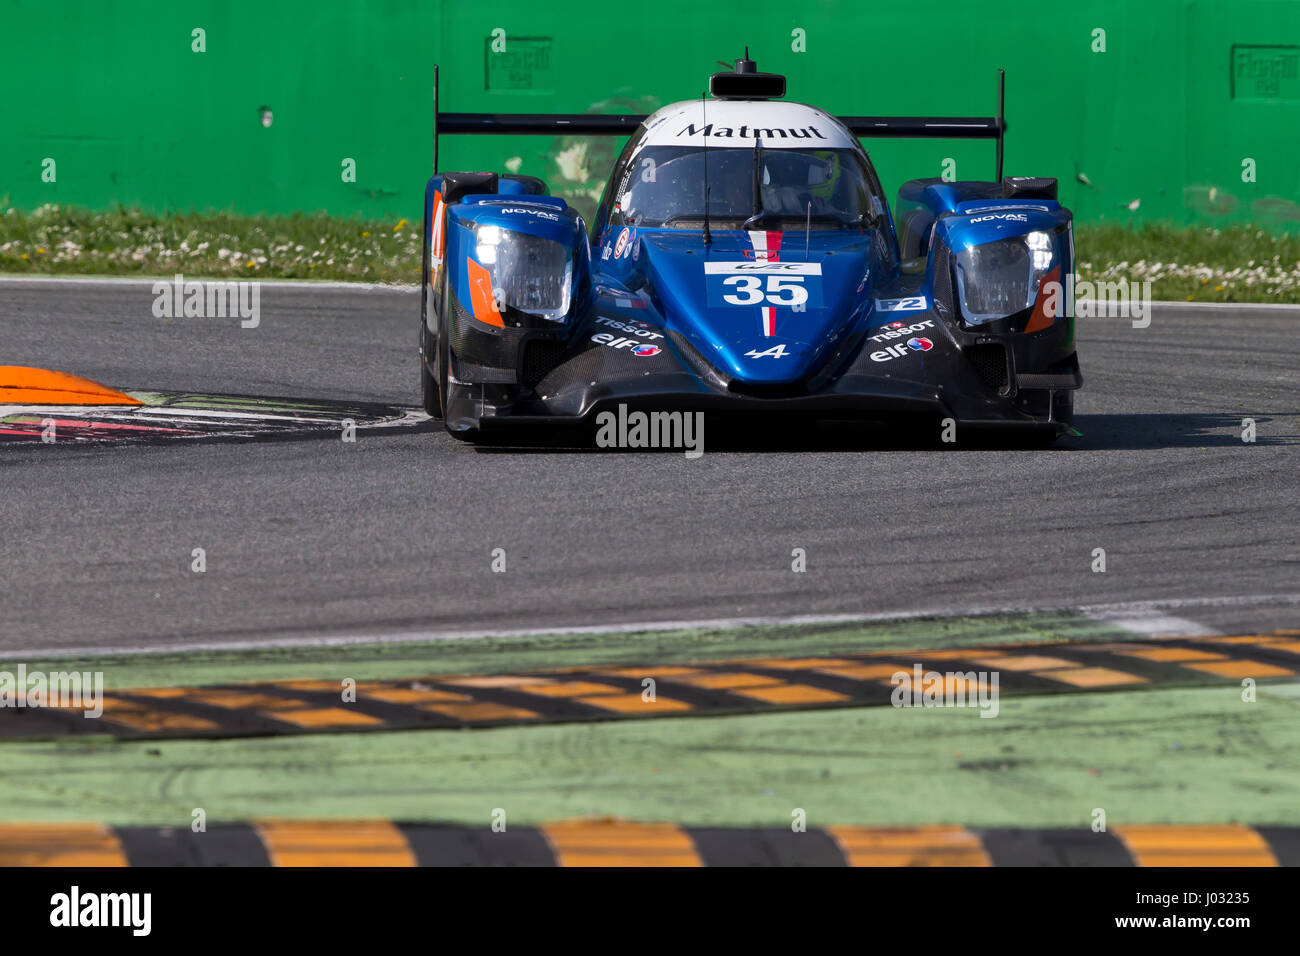 Monza, Italy - April 01, 2017: Alpine A470 - Gibson of Signatech Alpine Matmut Team, driven by P. Ragues / A. Negrao / N. Panciatici during the FIA Wo Stock Photo